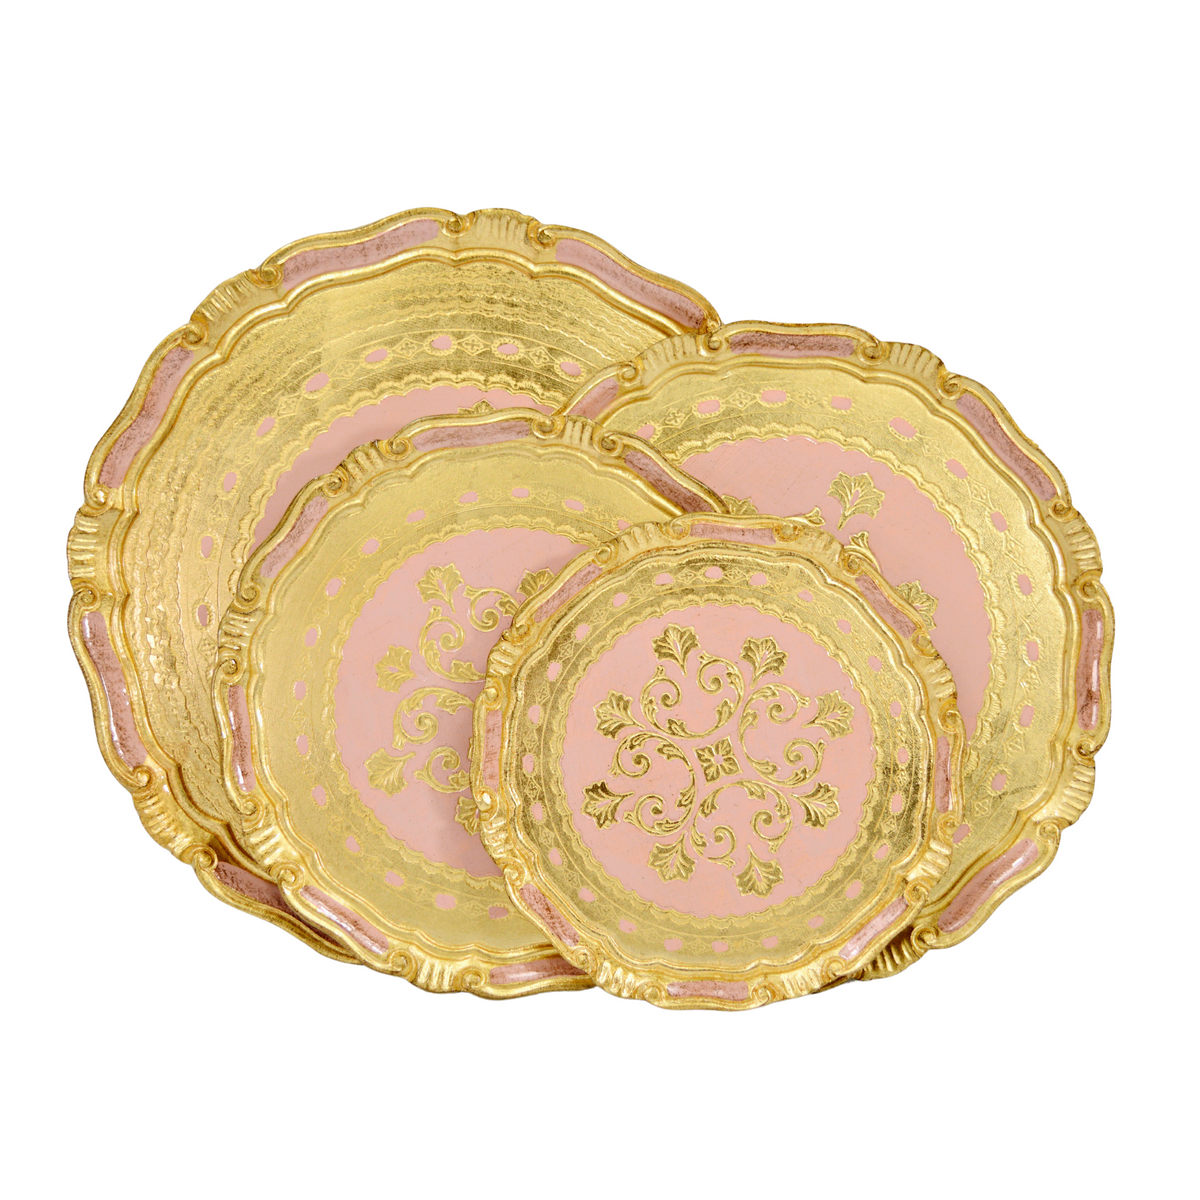 Florentine Carved Gilded Wood Circle Tray, Made in Italy - My Italian Decor